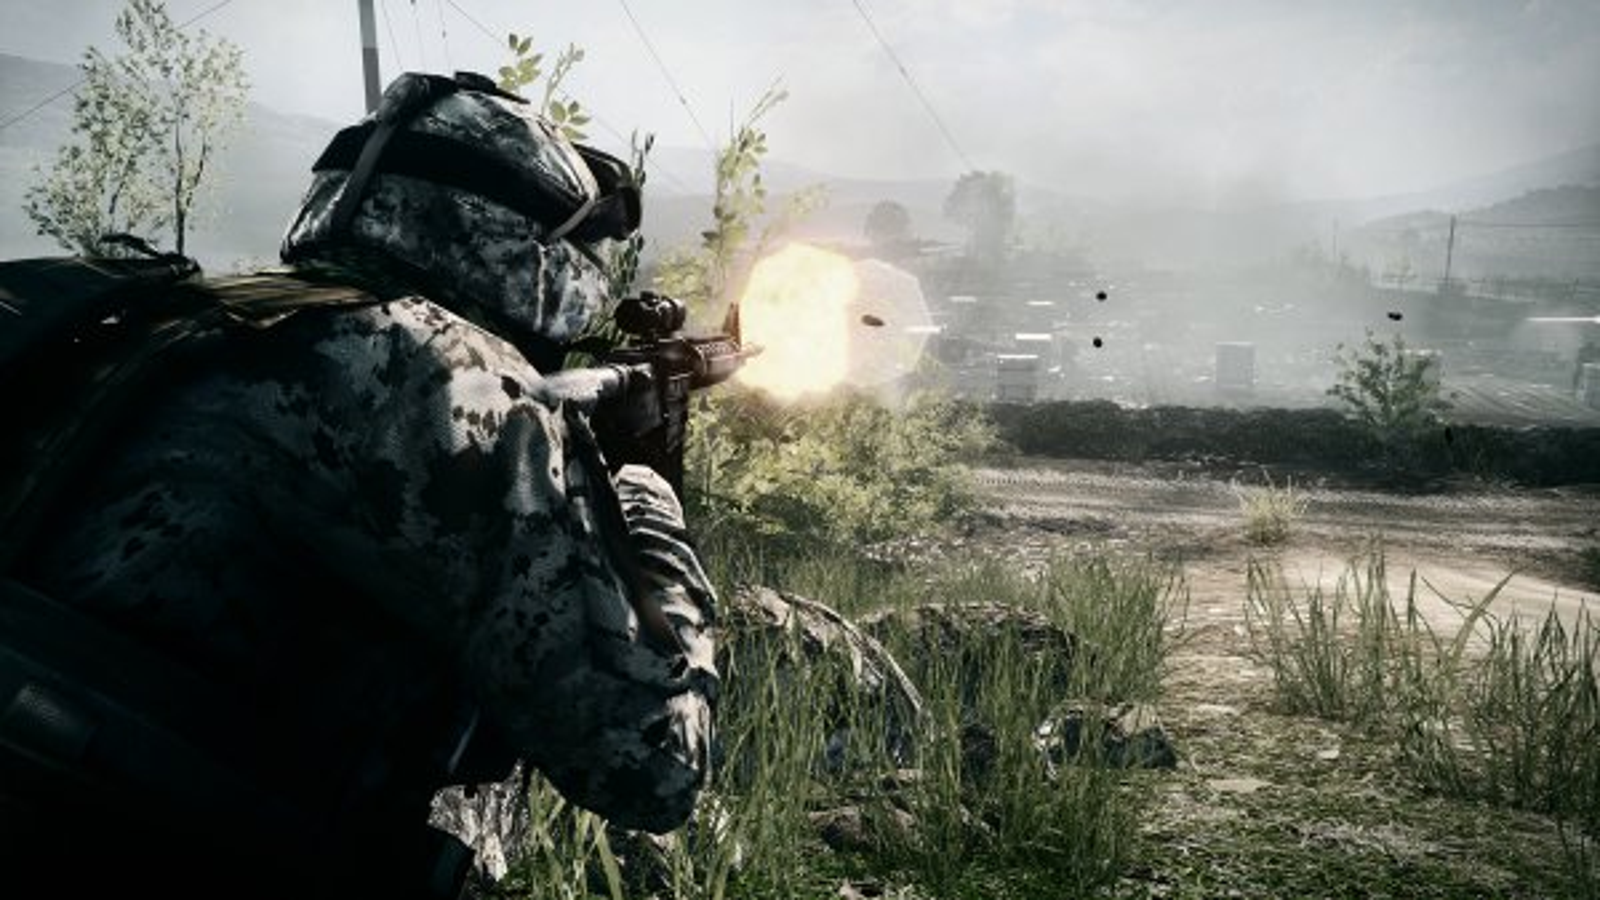 Is Battlefield 2042 worth it? Review from a semi-casual player